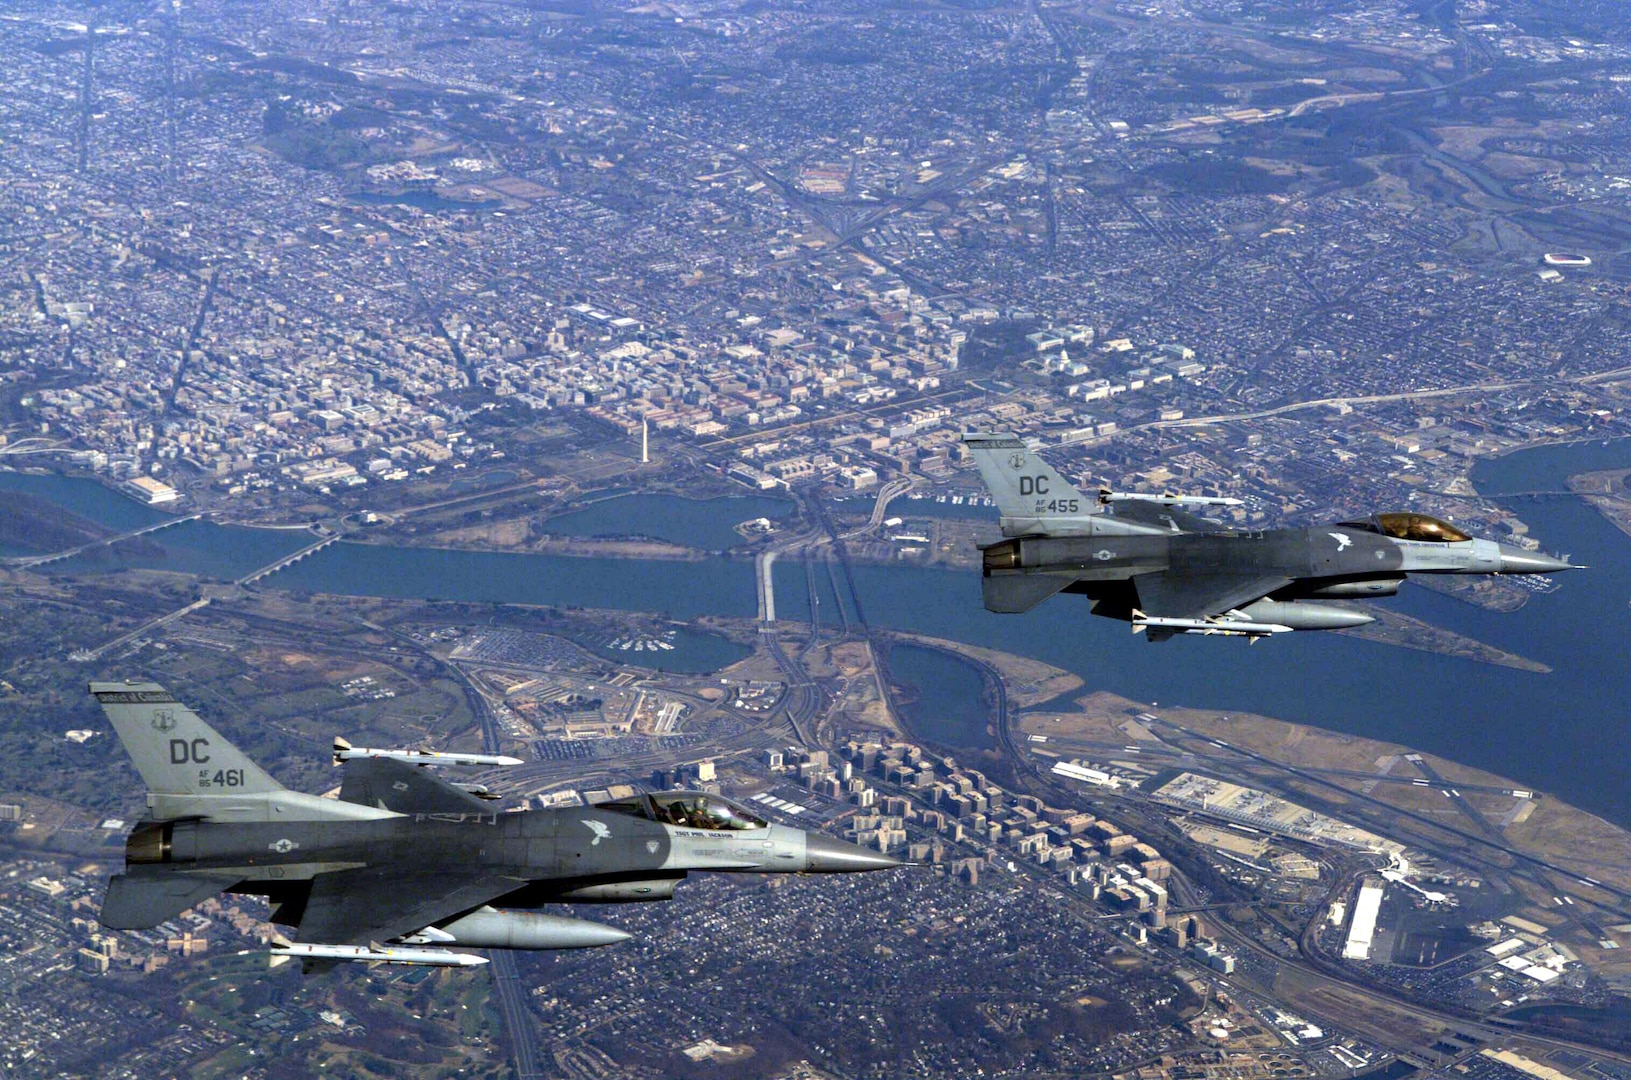 Two US Air Force (USAF) F-16C Fighting Falcon aircraft from the 121st Fighter Squadron, 113th Wing, District of Columbia (DC) Air National Guard (ANG), fly over the nation’s Capital, during a Combat Air Patrol mission in support of Operation NOBLE EAGLE.